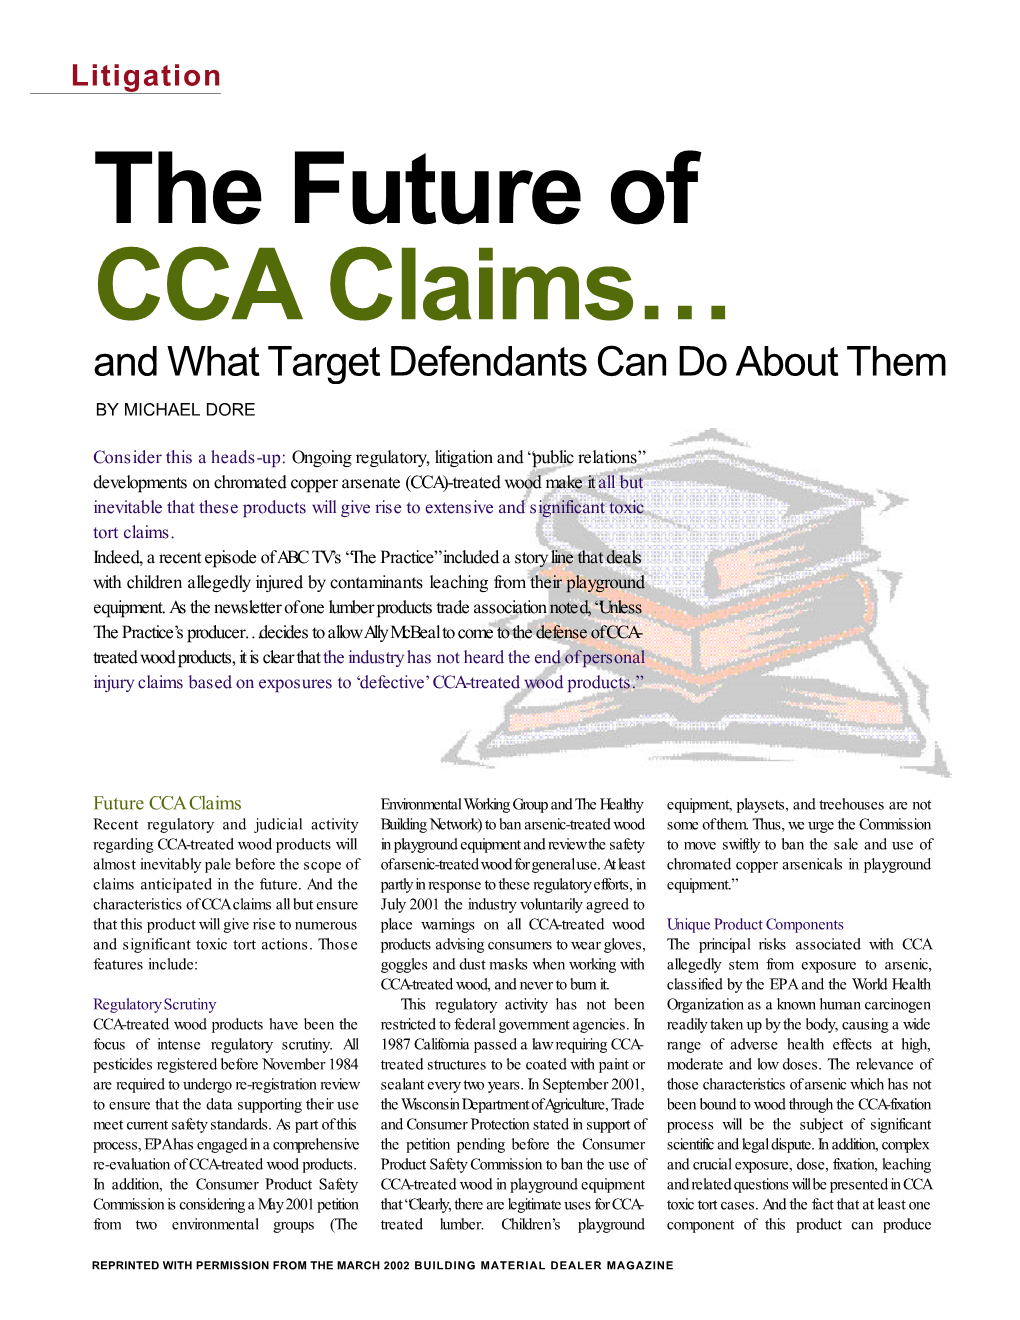 The Future of CCA Claims… and What Target Defendants Can Do About Them by MICHAEL DORE